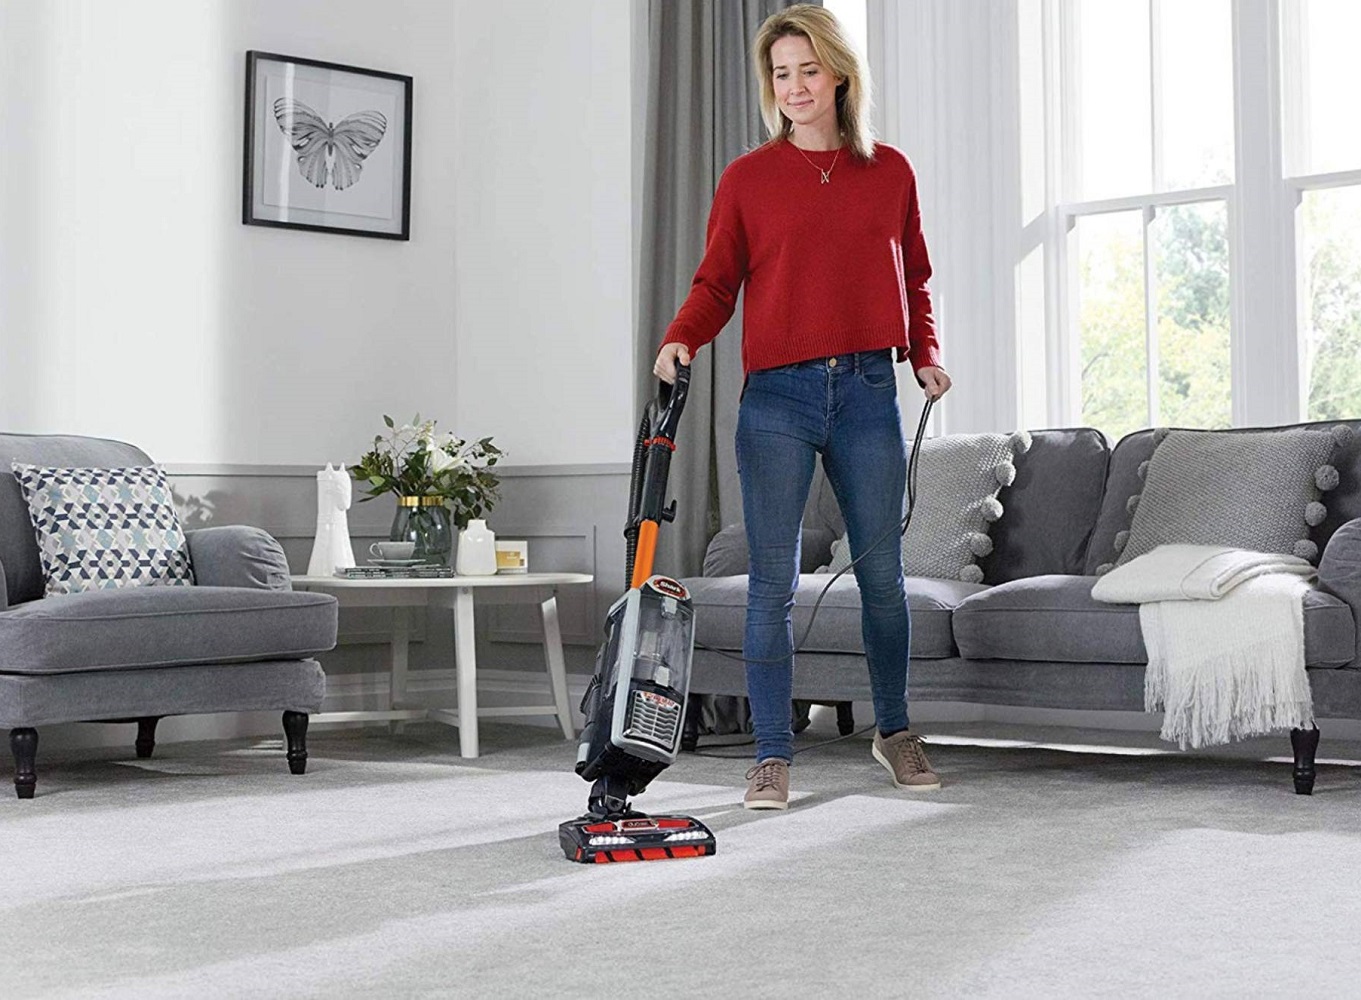 7 Best Upright Vacuum Cleaners for November 2022